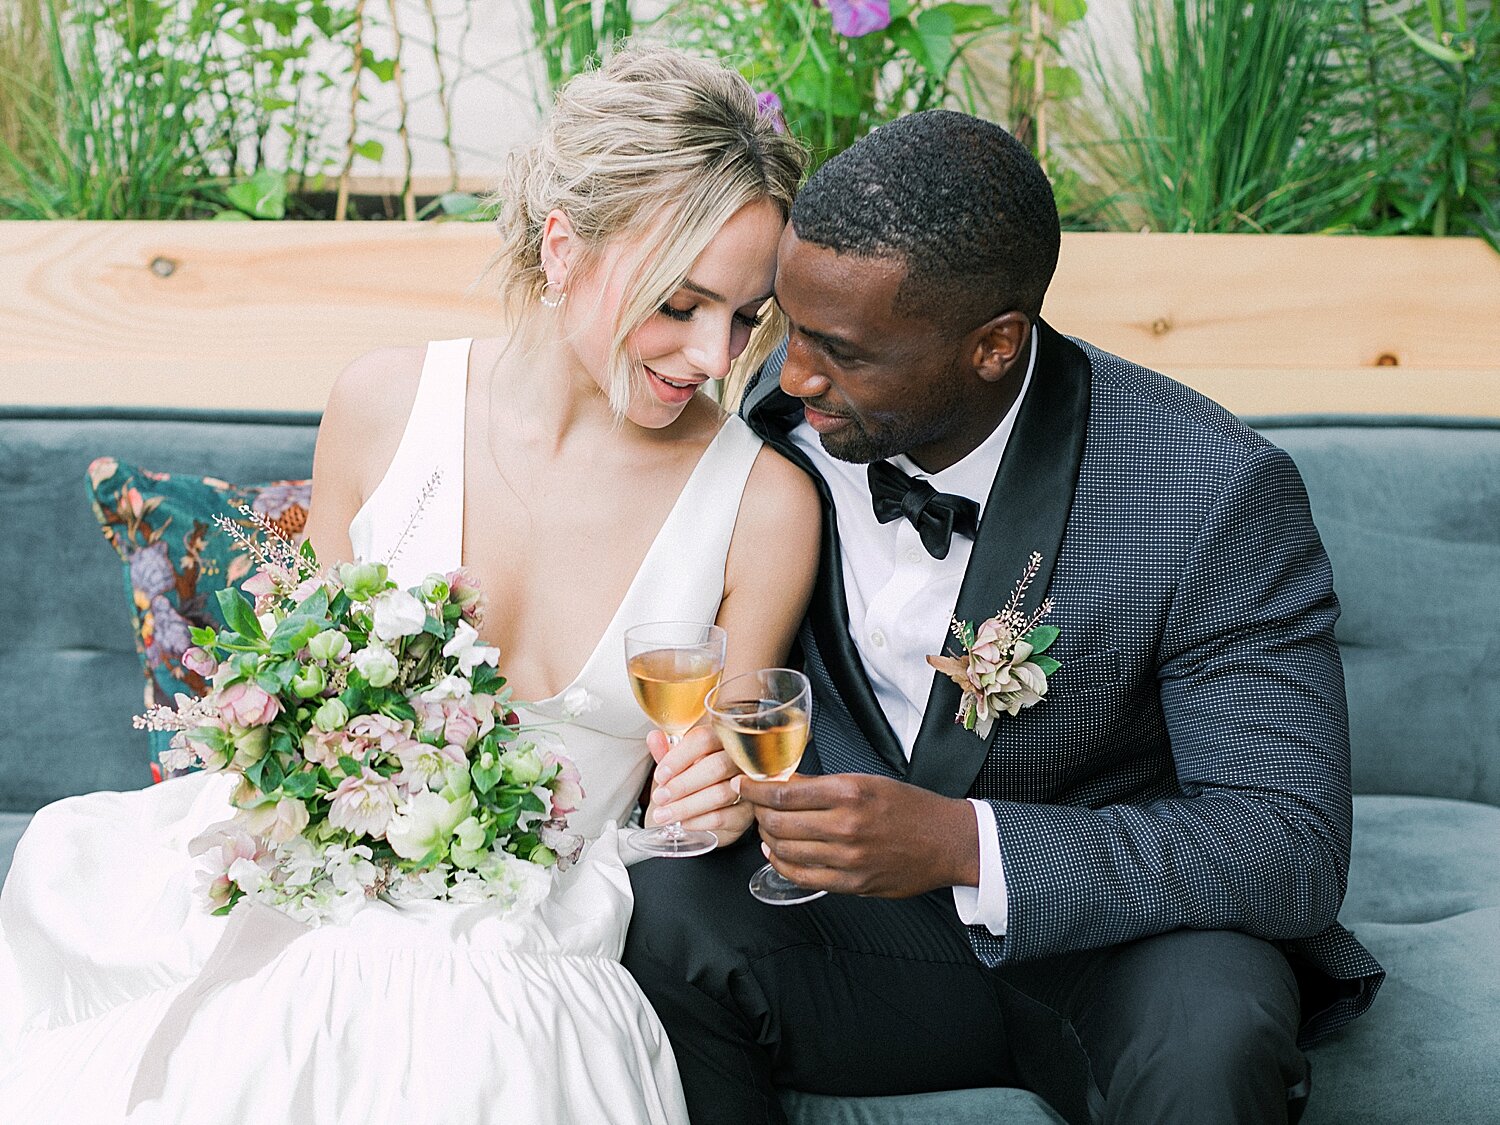 newlyweds sit during reception at Celestine | Asher Gardner Photography | Intimate Ceremony in DUMBO New York